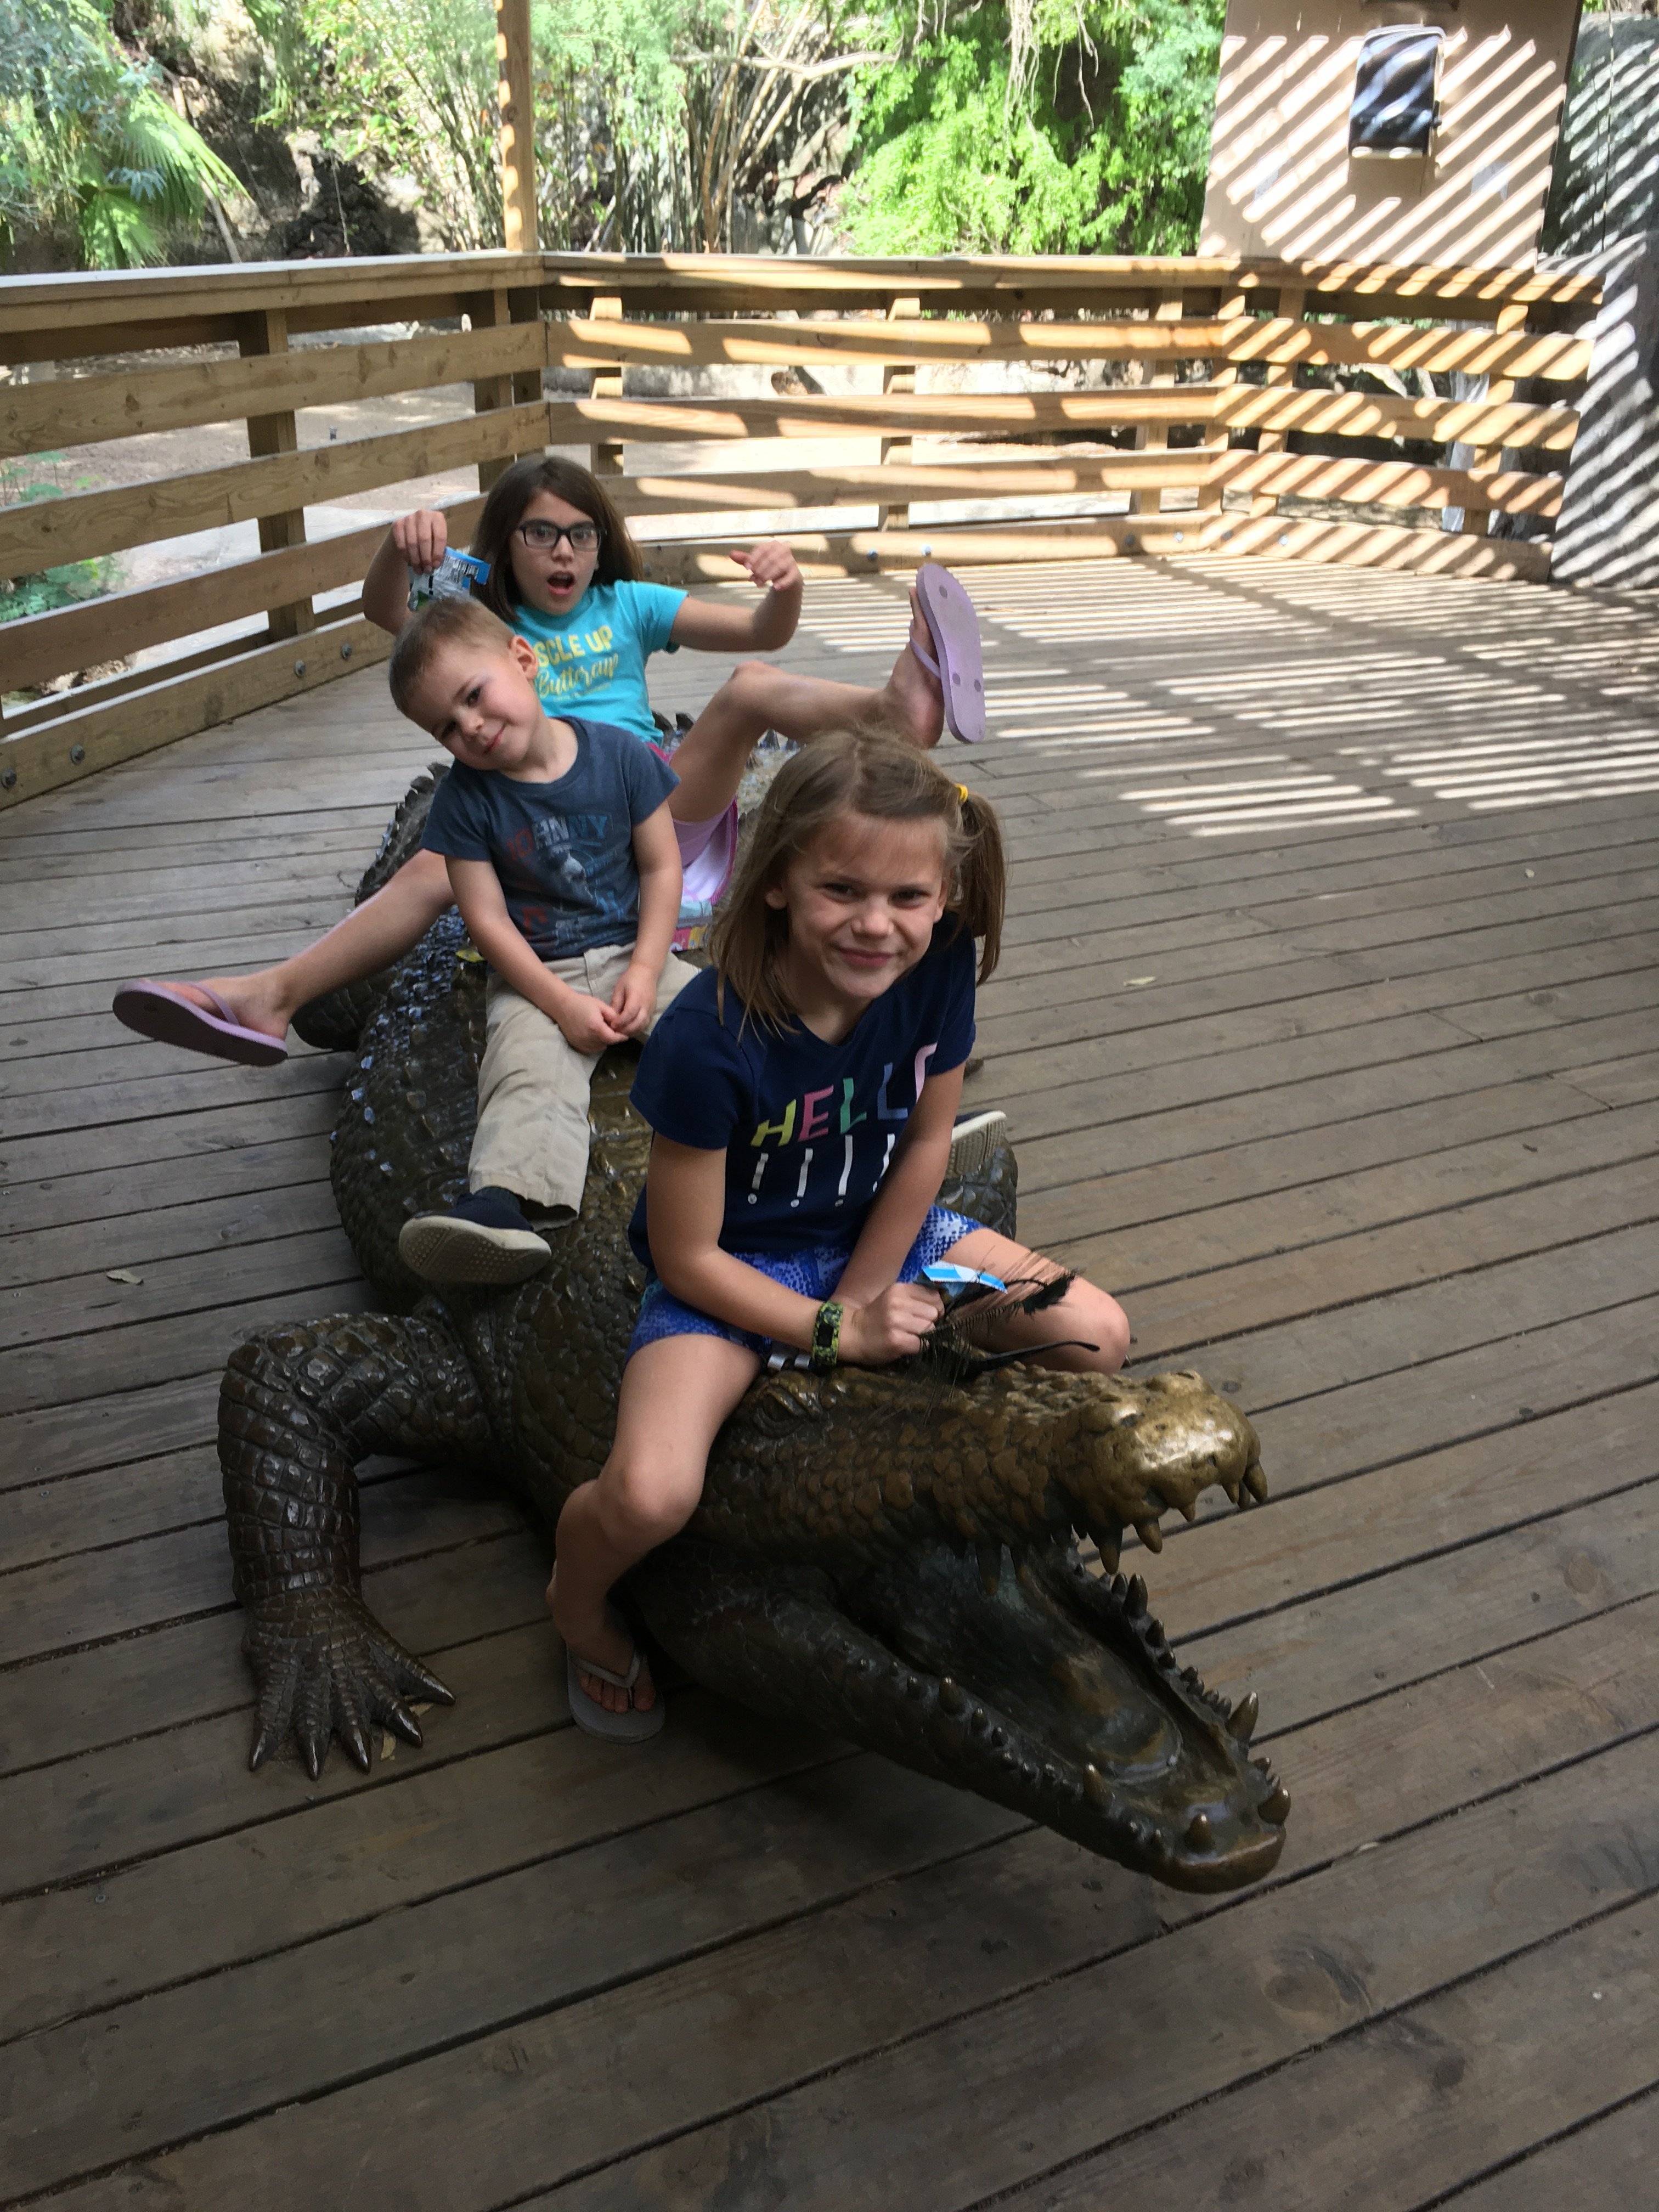 gladys porter zoo summer camps